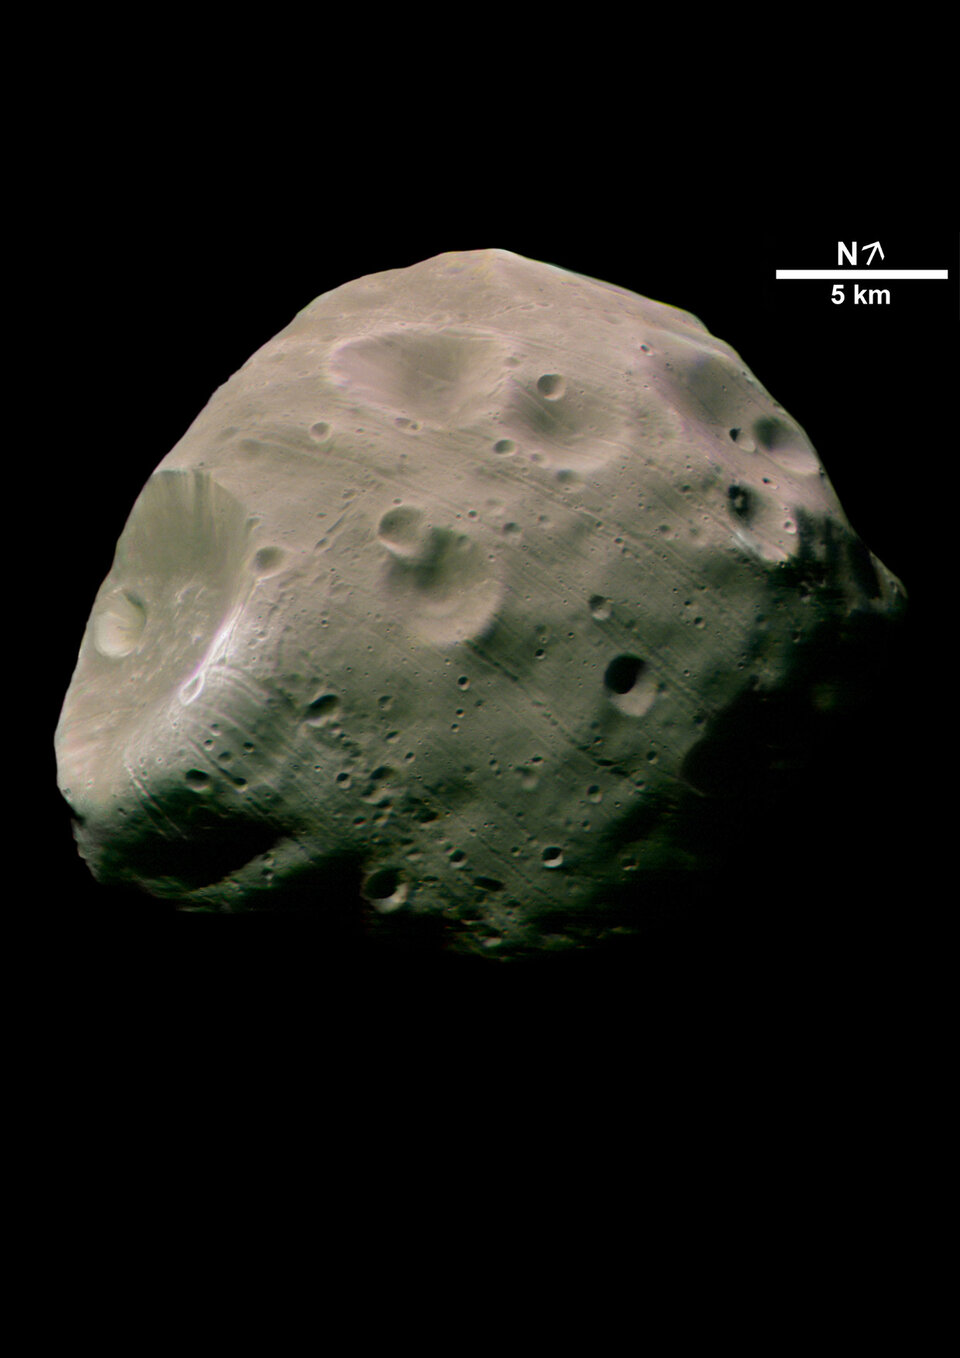 Phobos in colour, close-up